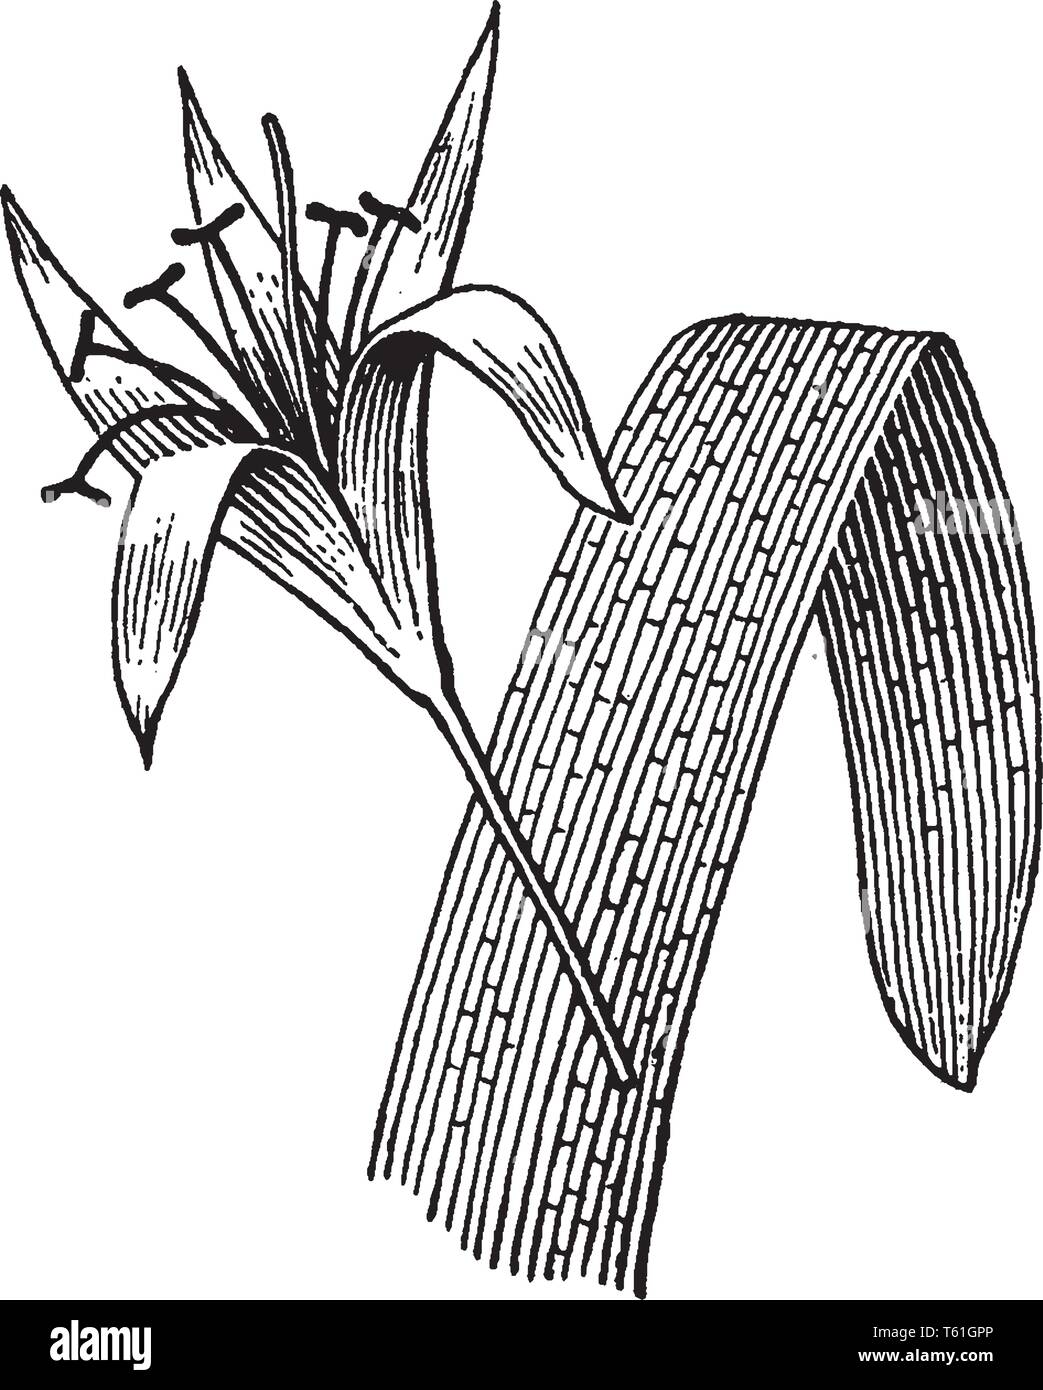 The picture is of a flower with filaments belongs to Crinum genus. The large flowers are developed from bulbs on leafless stems, vintage line drawing  Stock Vector